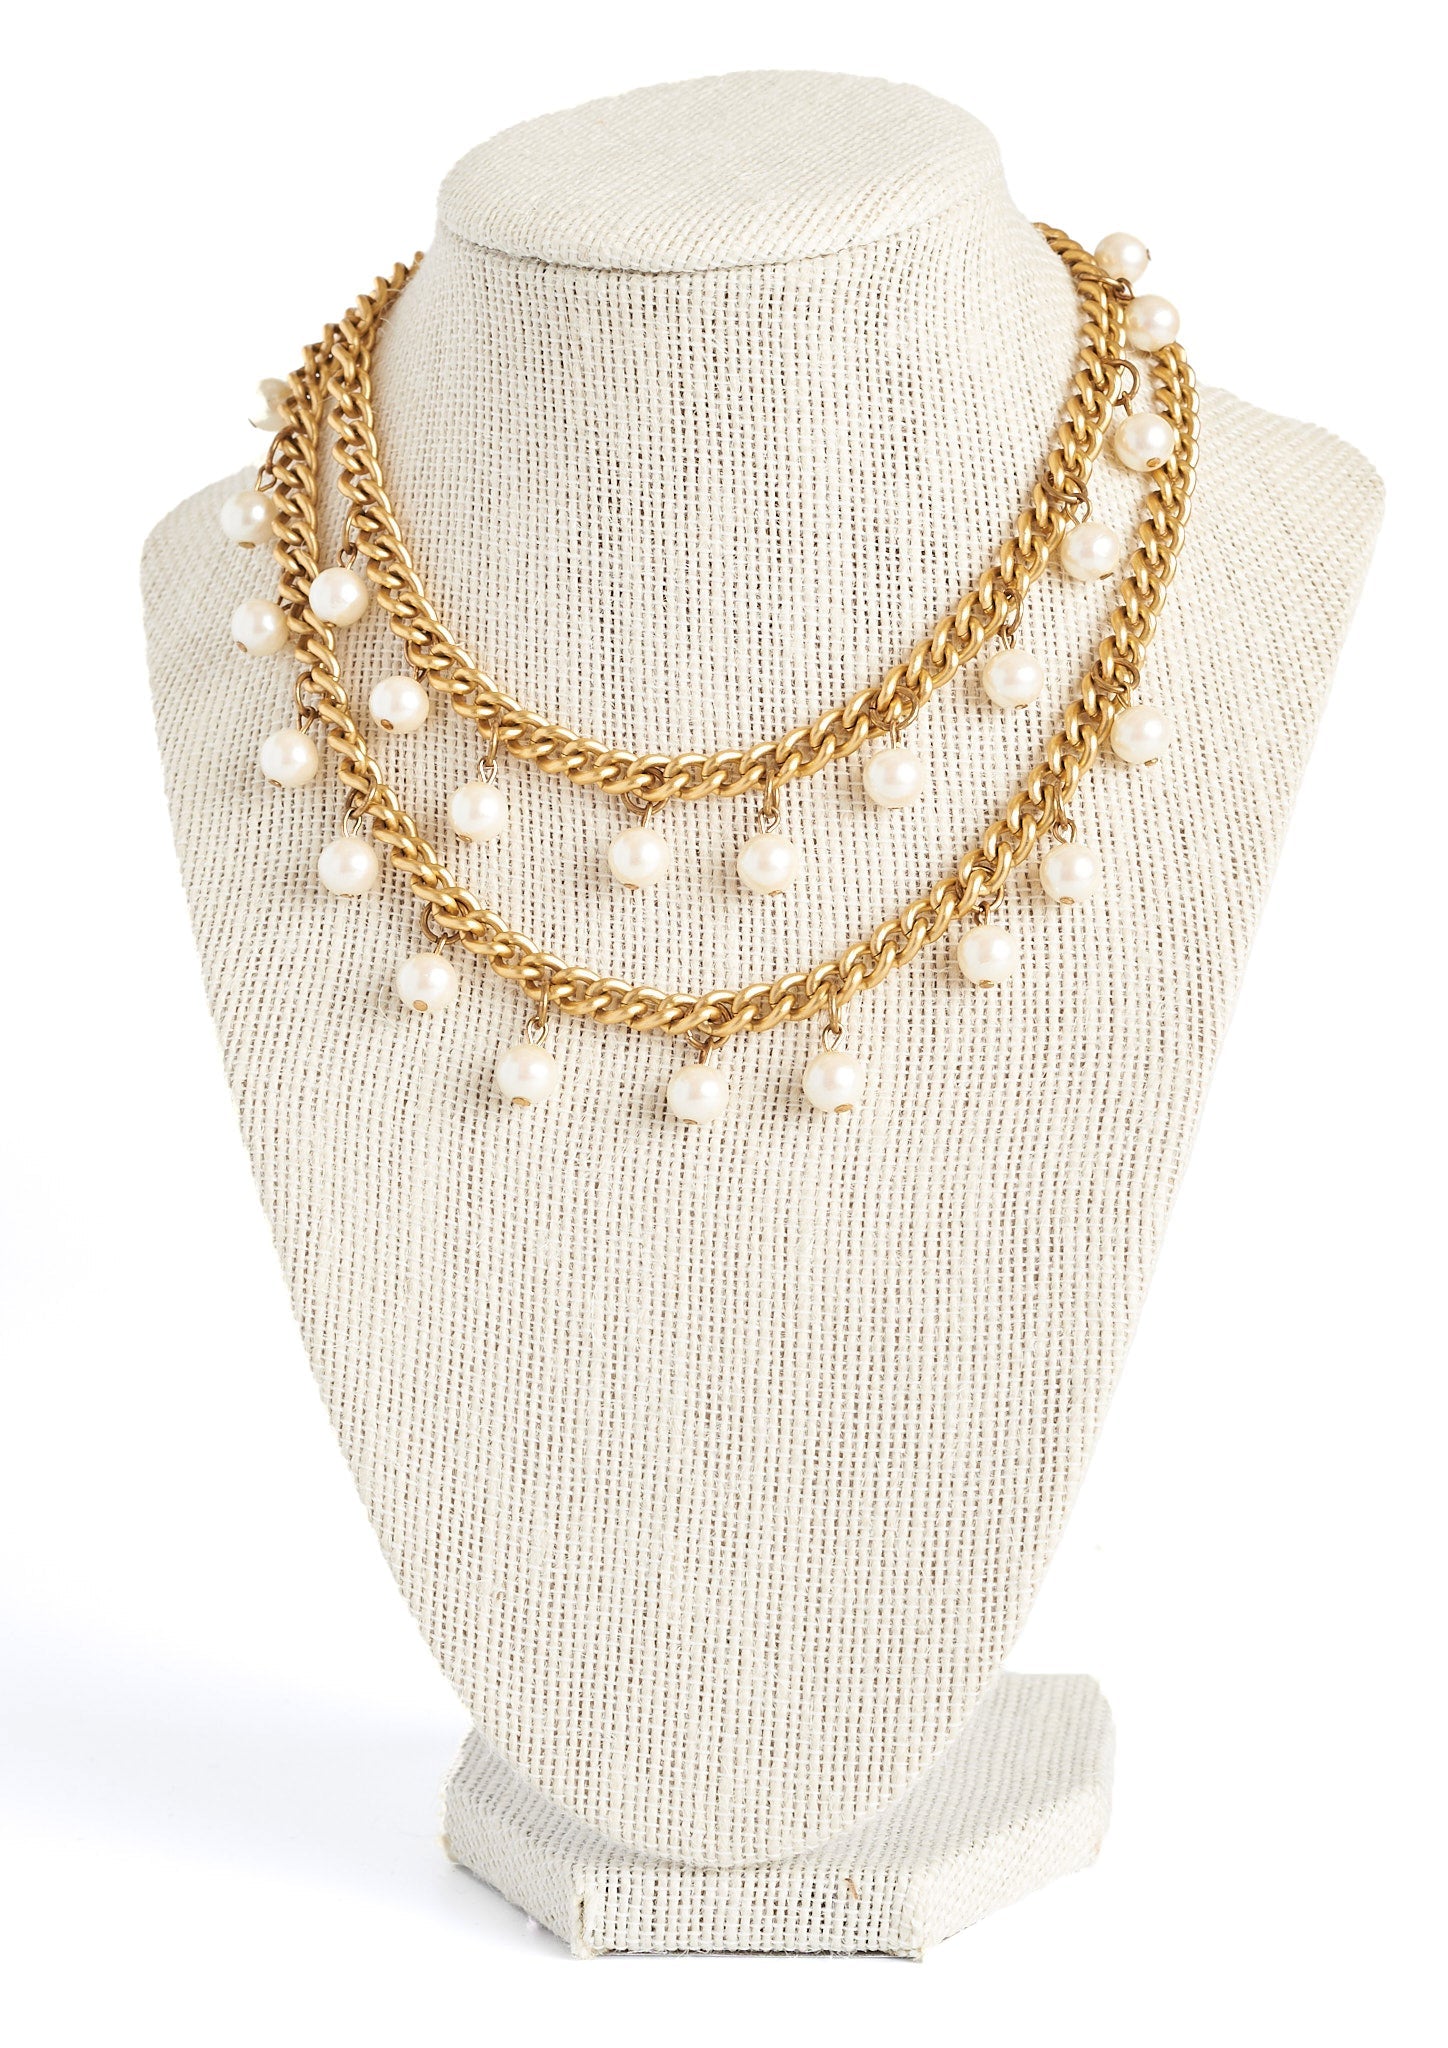 Sale 214: Vintage Couture and Accessories by Hindman Auctions - Issuu